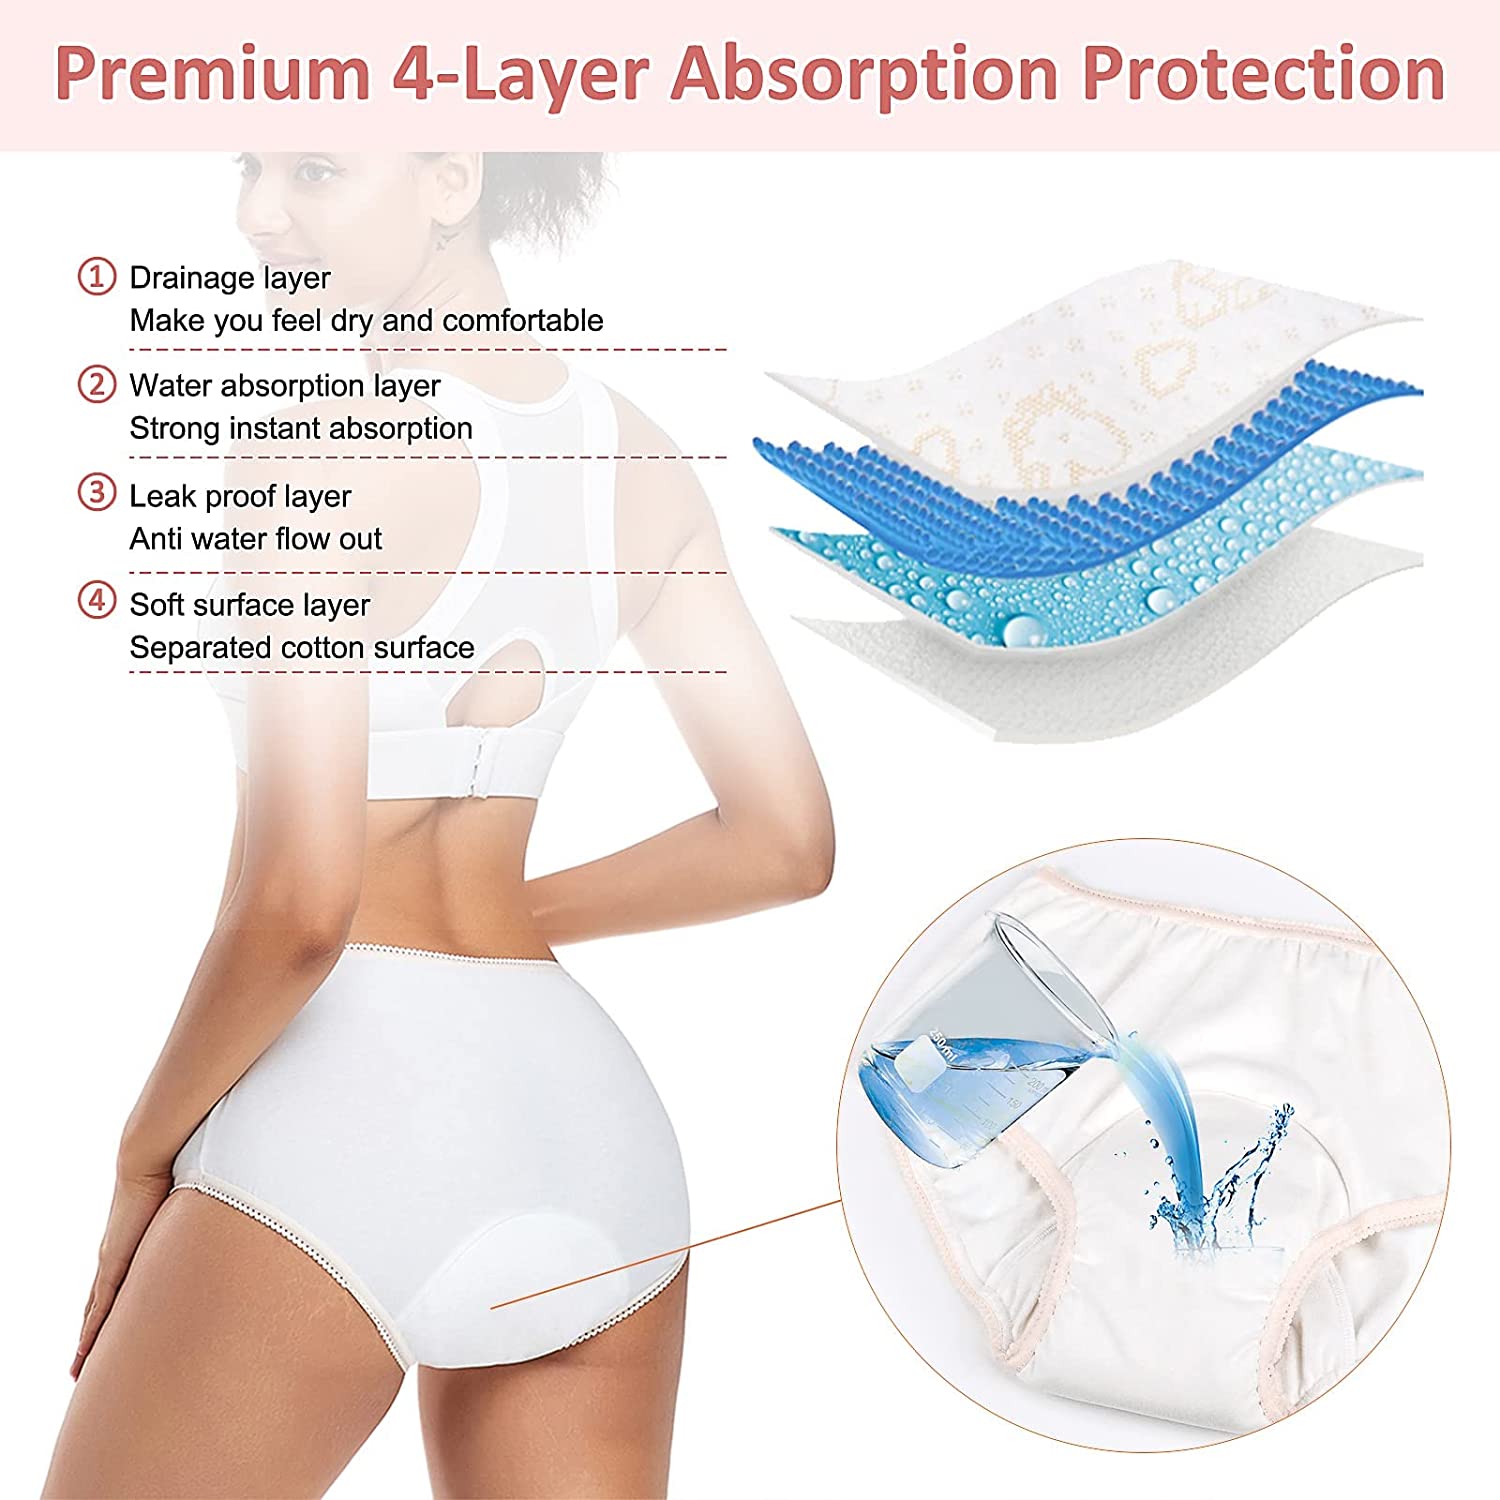 Incontinence Underwear for Women Washable Super Absorbency Urinary